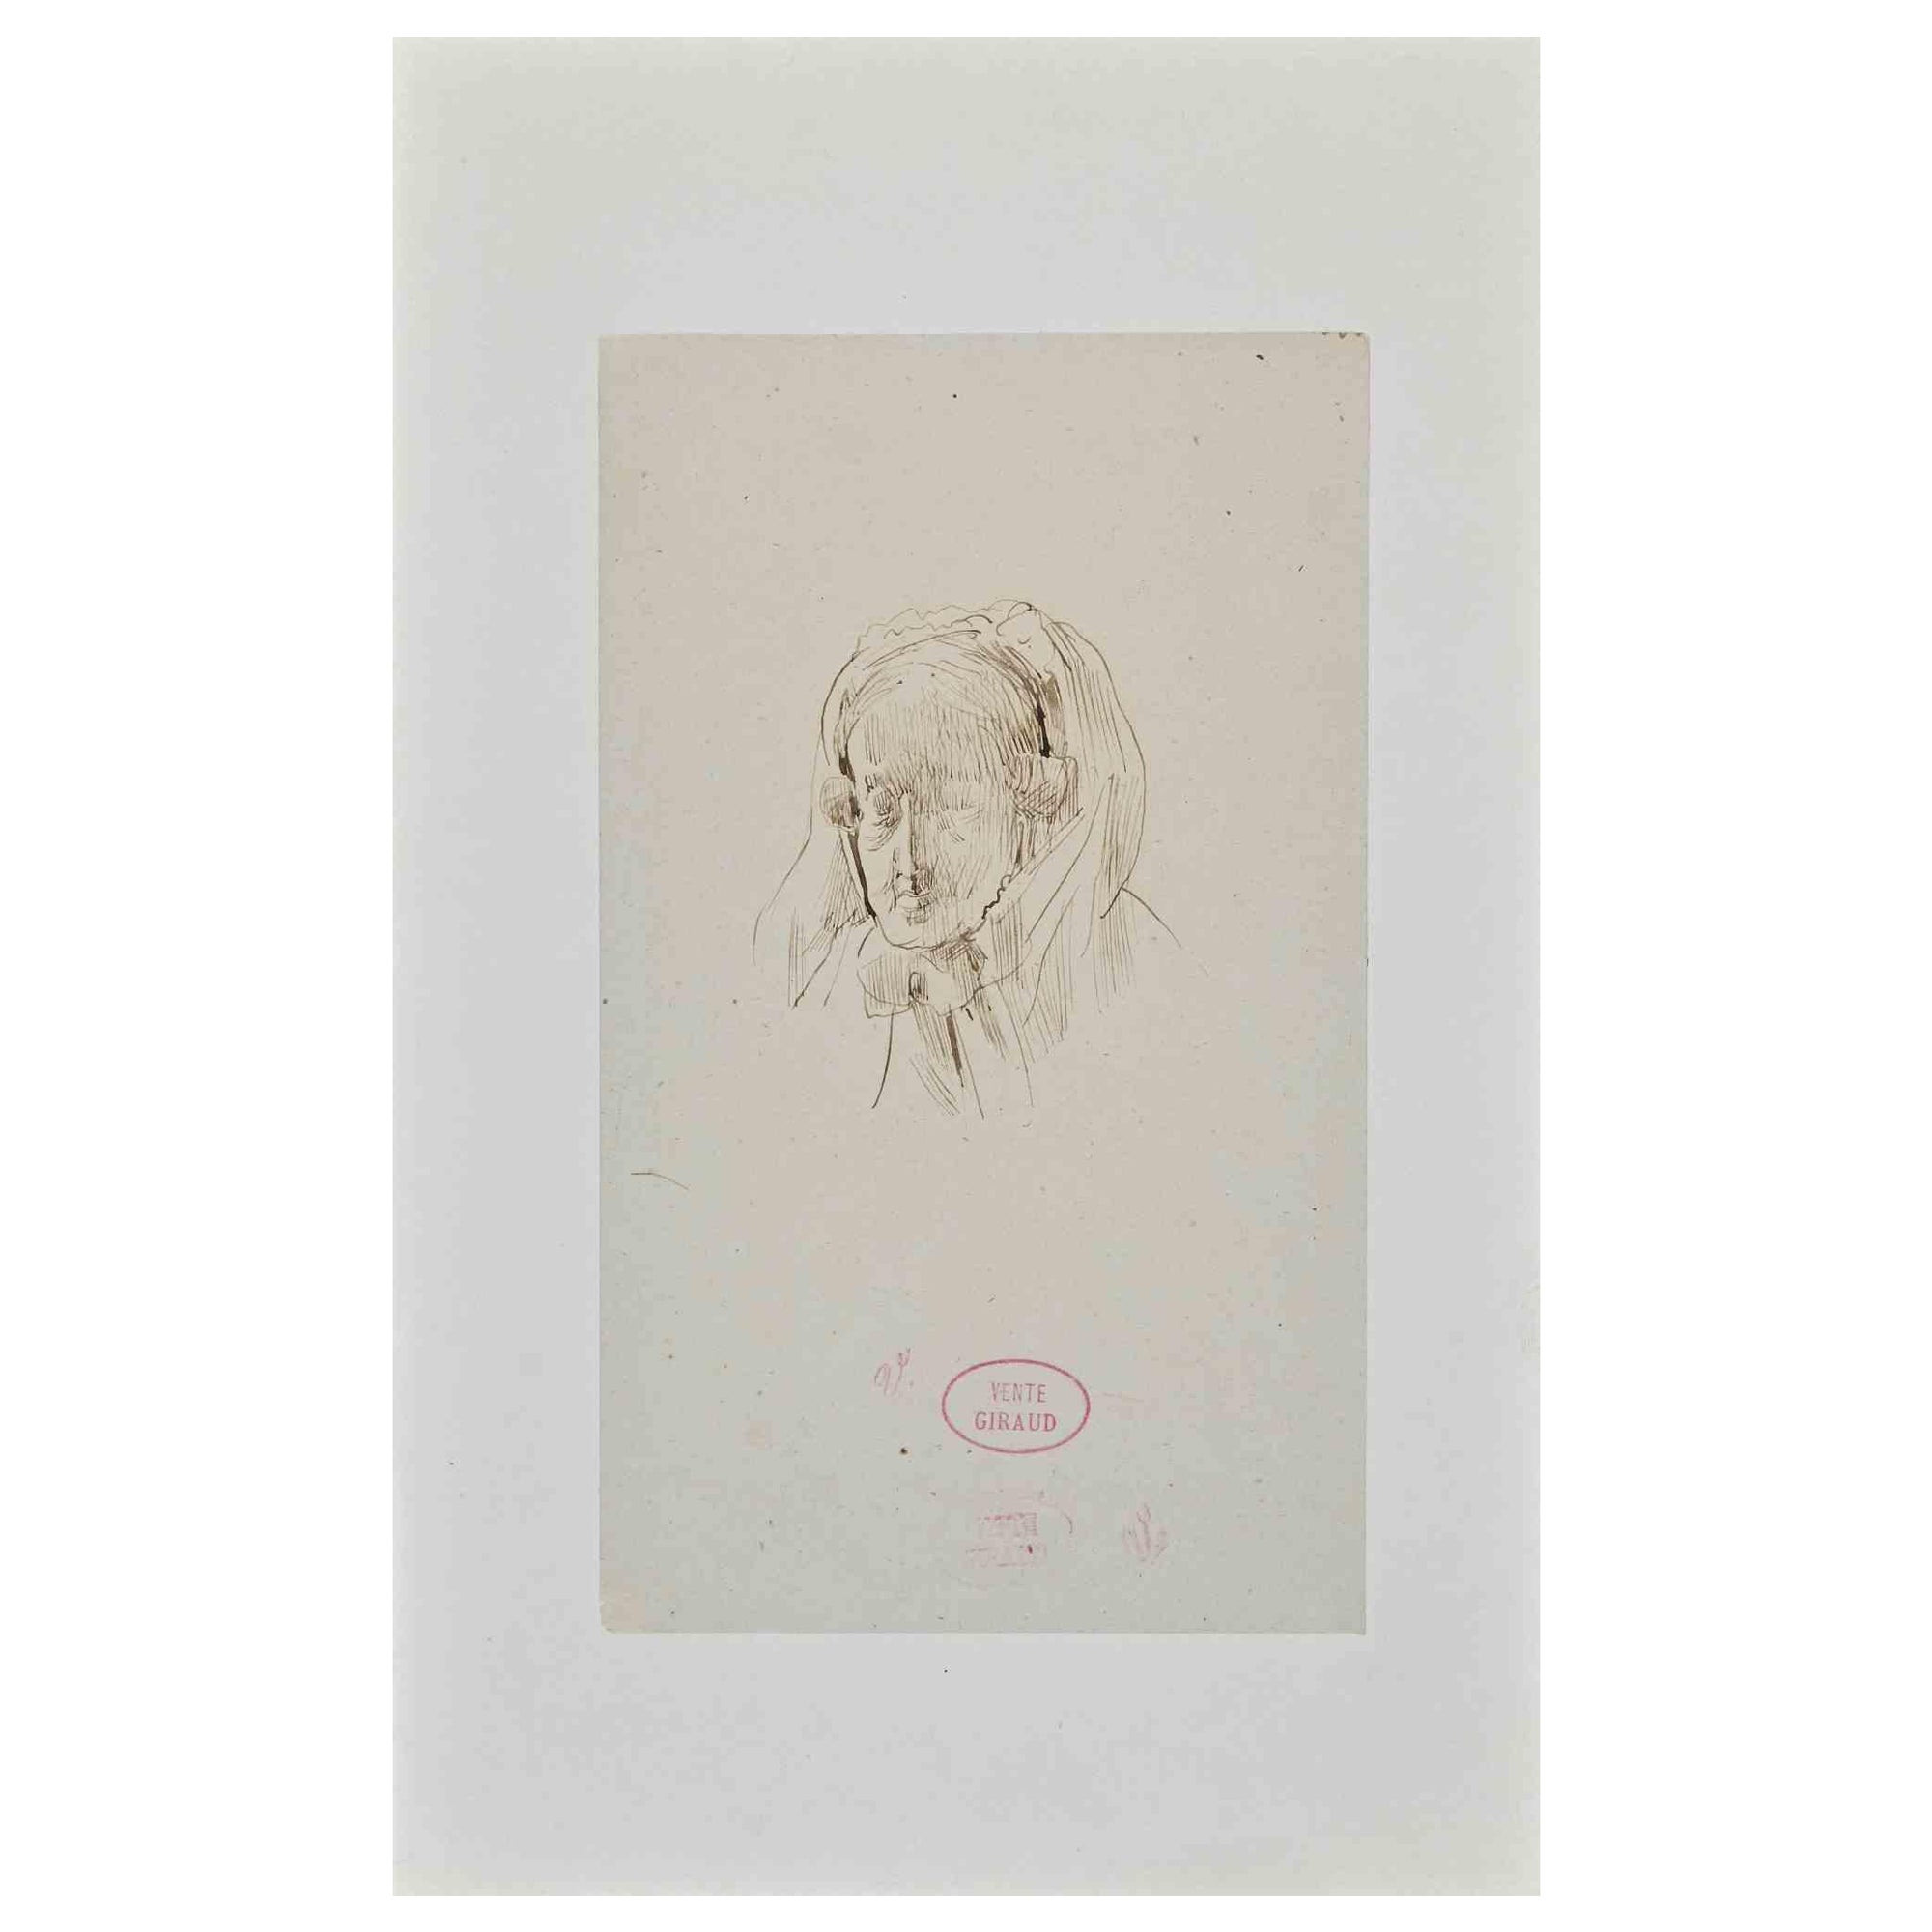 Portrait of an Old Woman -  Original Drawing by E. Giraud - Late 19th Century